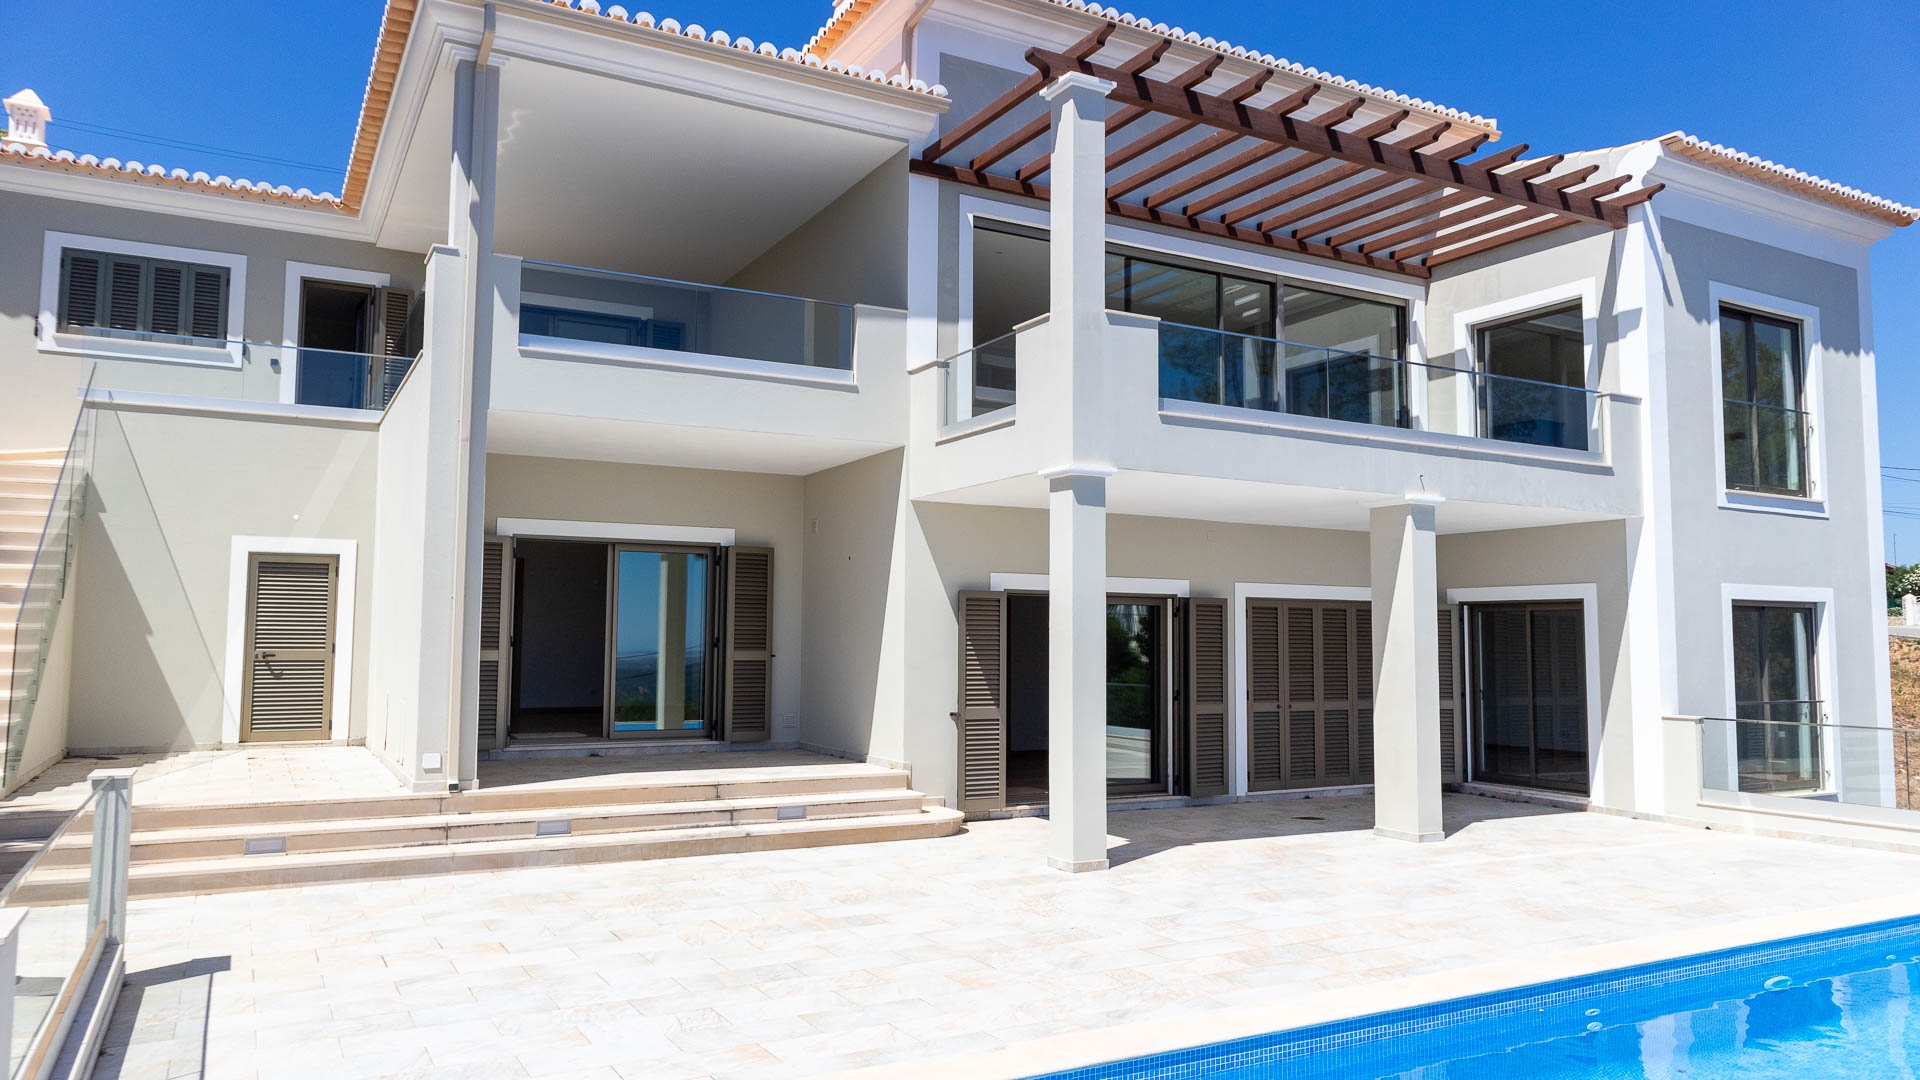 Contemporary 4 Bedroom Villa with Immense Views near Monchique | LG1806 Recently completed high quality modern villa in a mature and peaceful neighbourhood near Caldas de Monchique with amazing panoramic views over the hills to the distant south coast ocean.